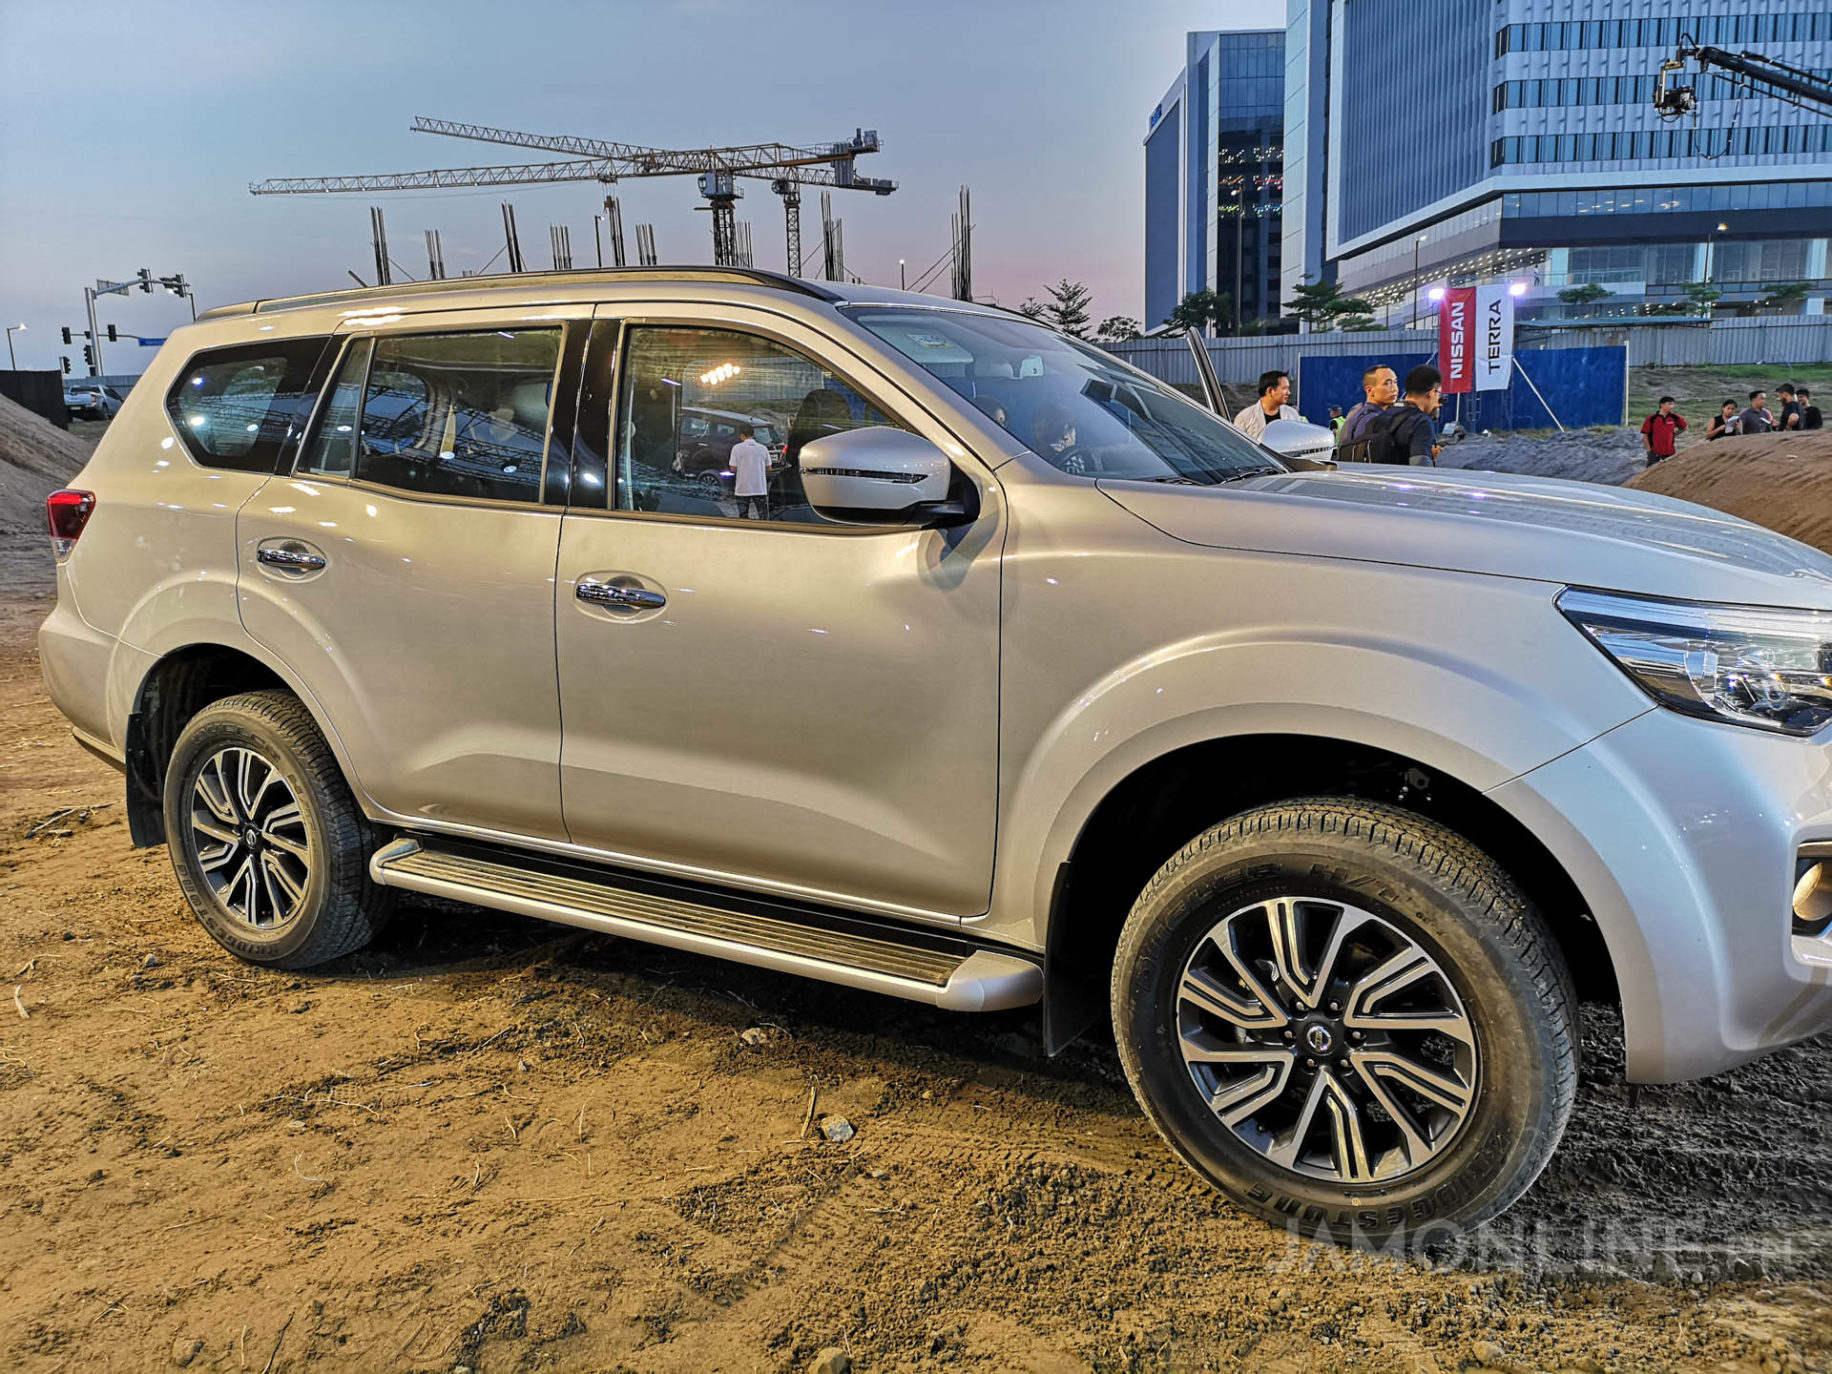 Nissan Launches Terra Mid-sized SUV in the Philippines - Jam Online